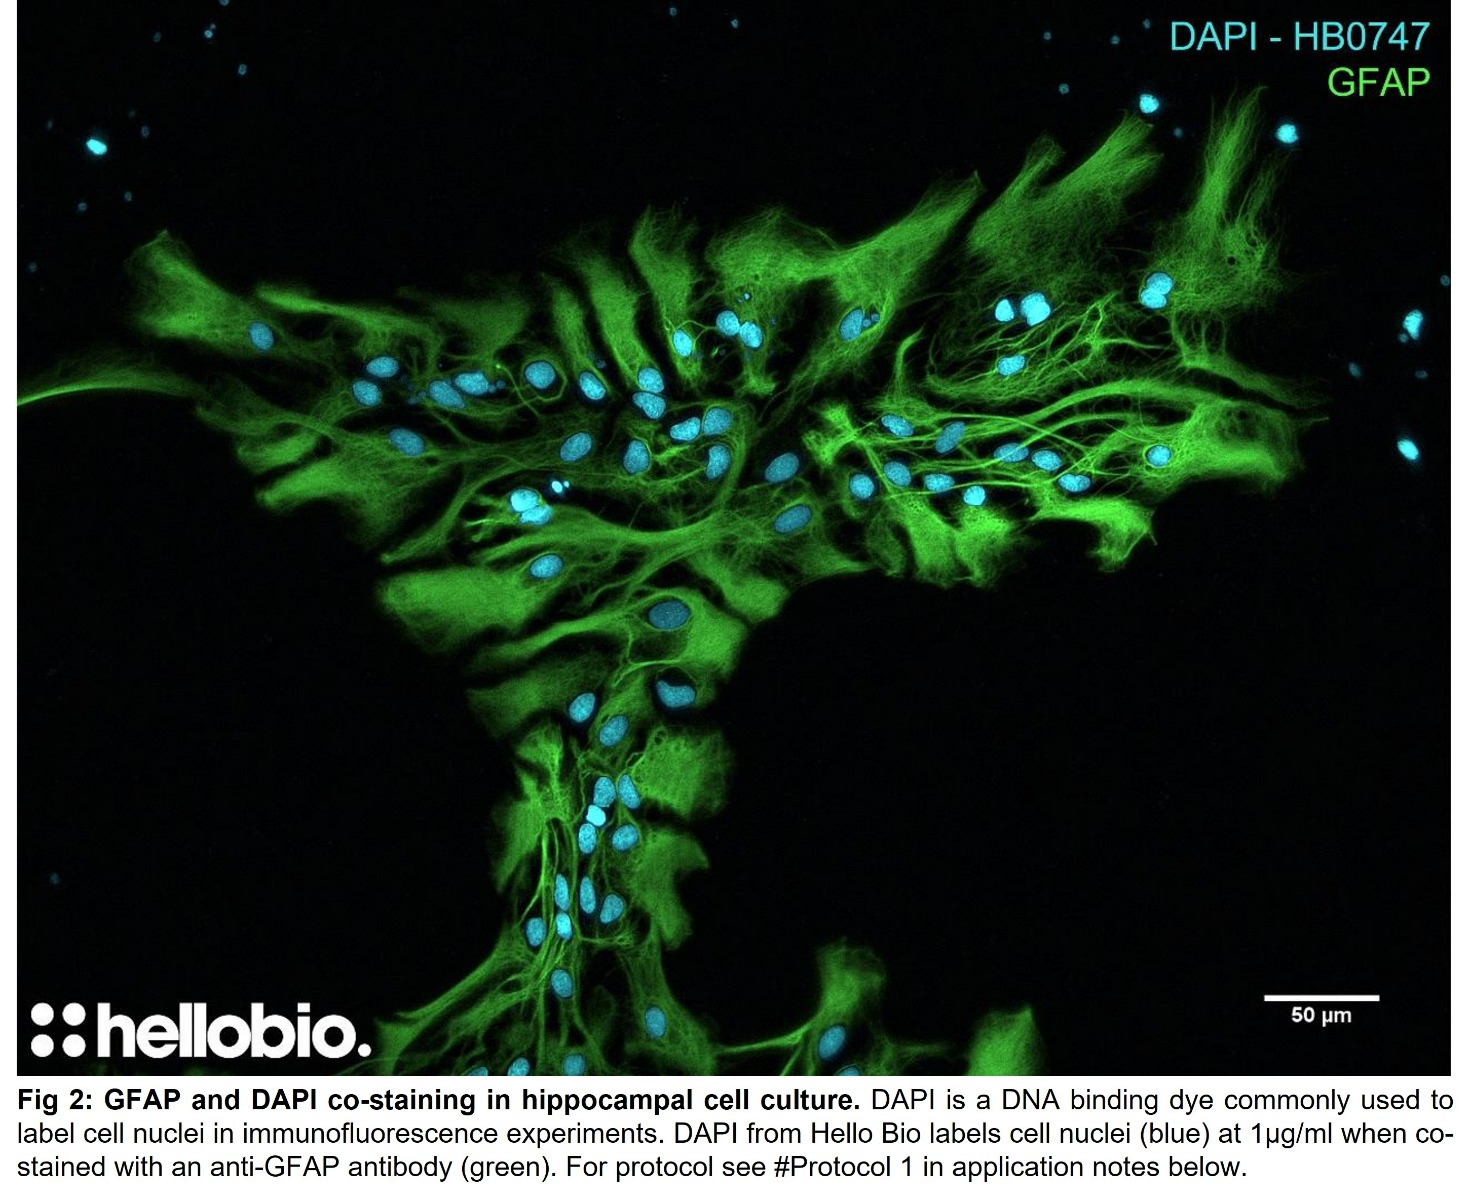 Fig 2: GFAP and DAPI co-staining in hippocampal cell culture. 